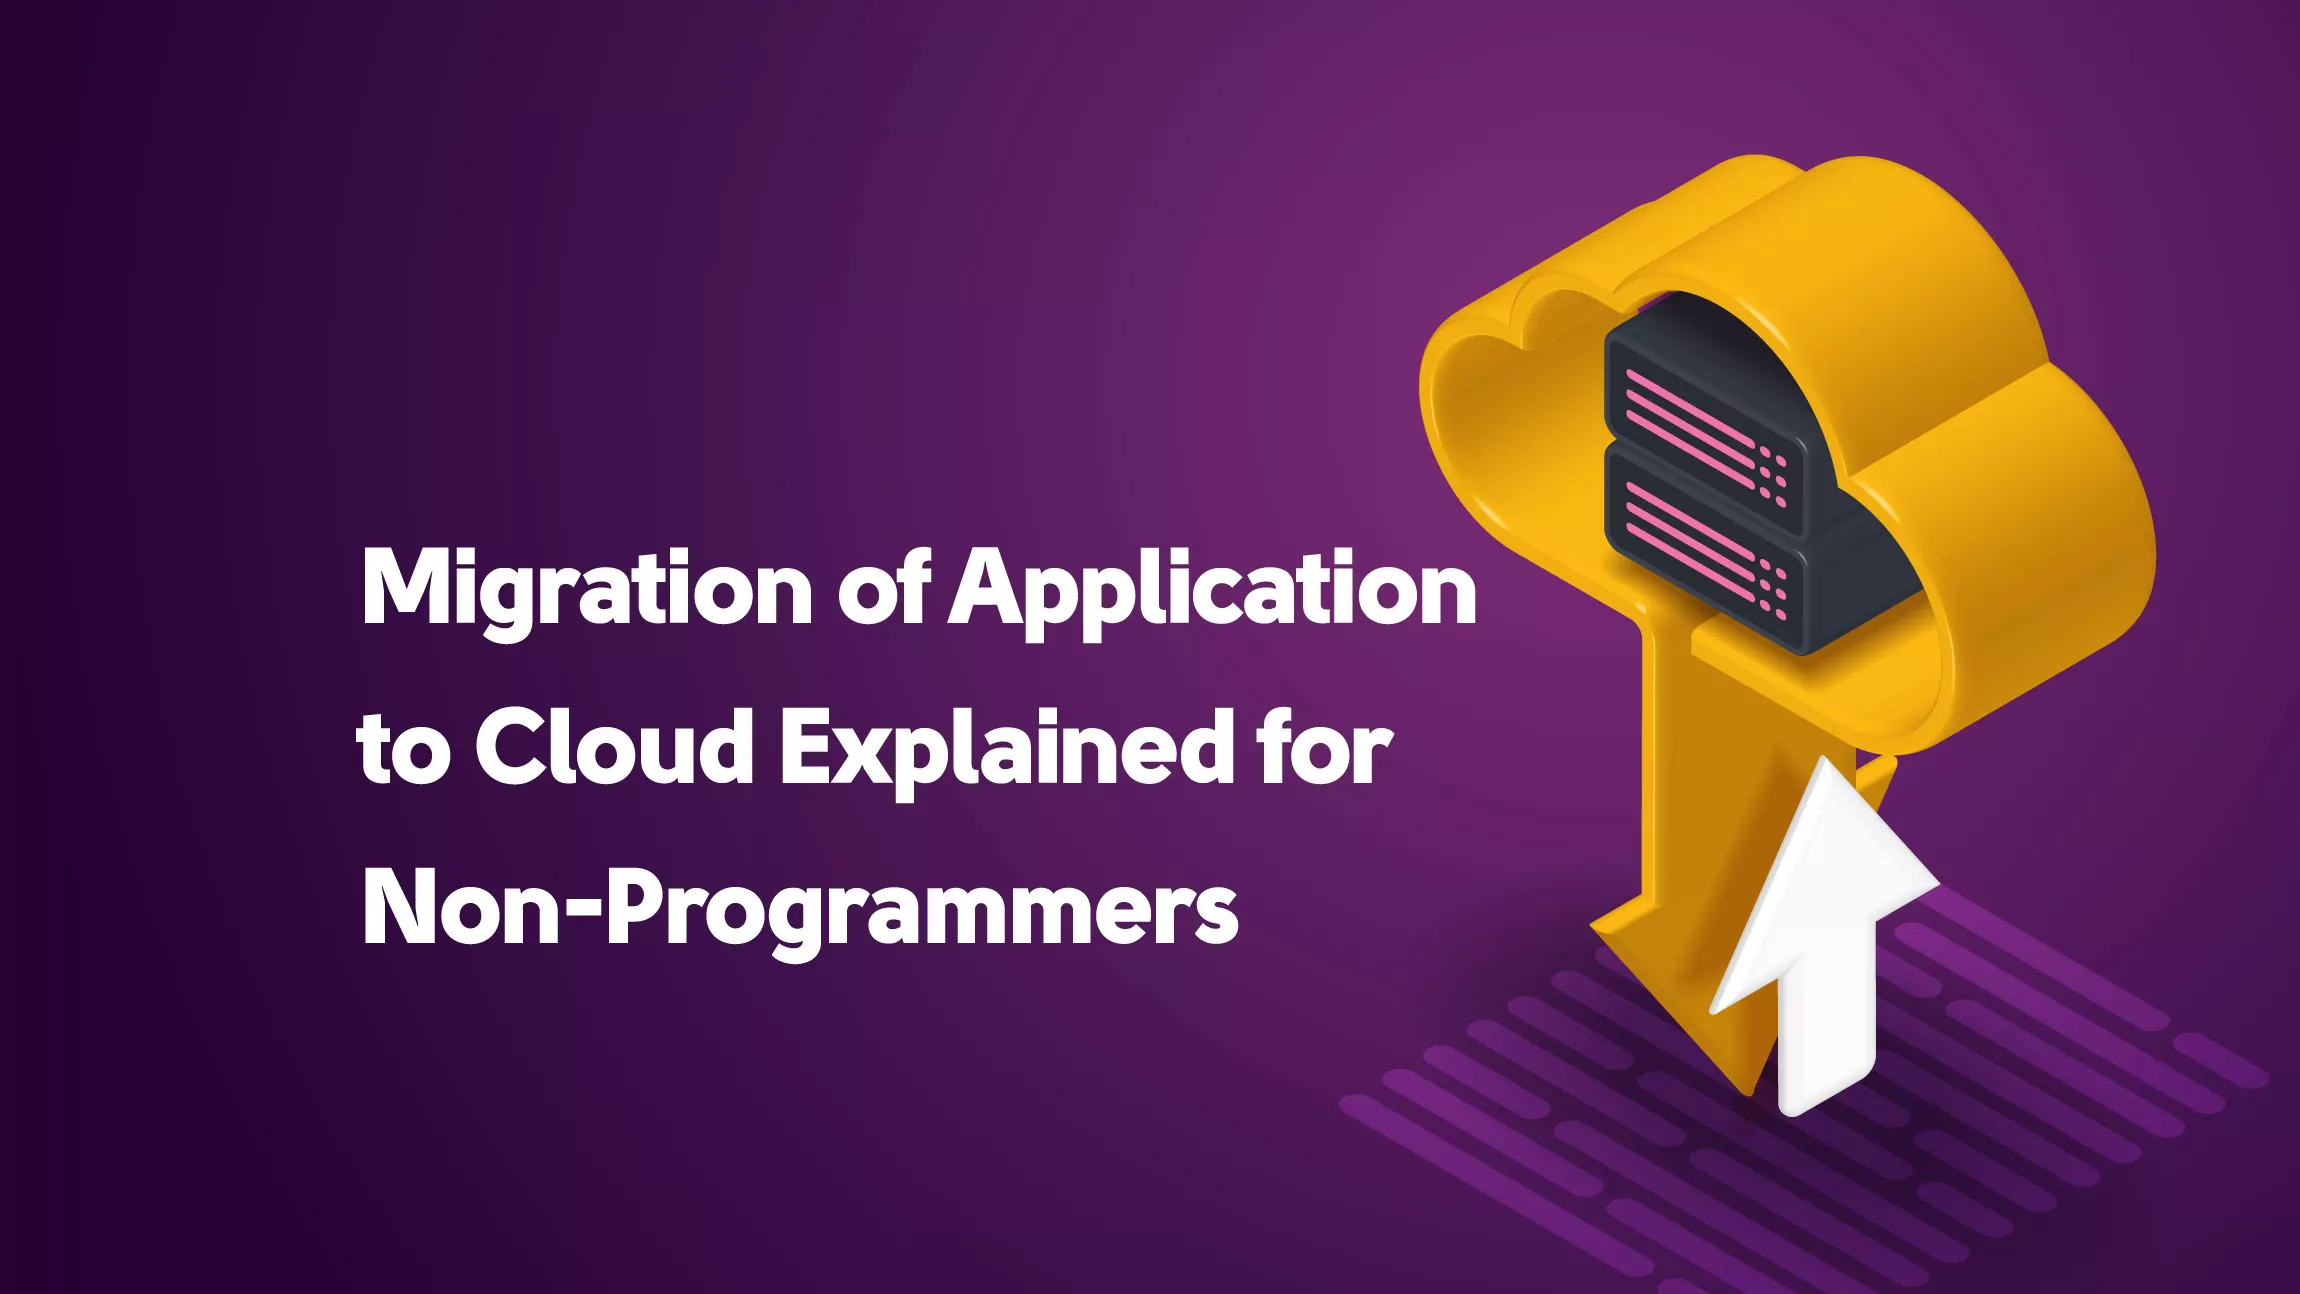 Migration of Application to Cloud Explained for Non-Programmers